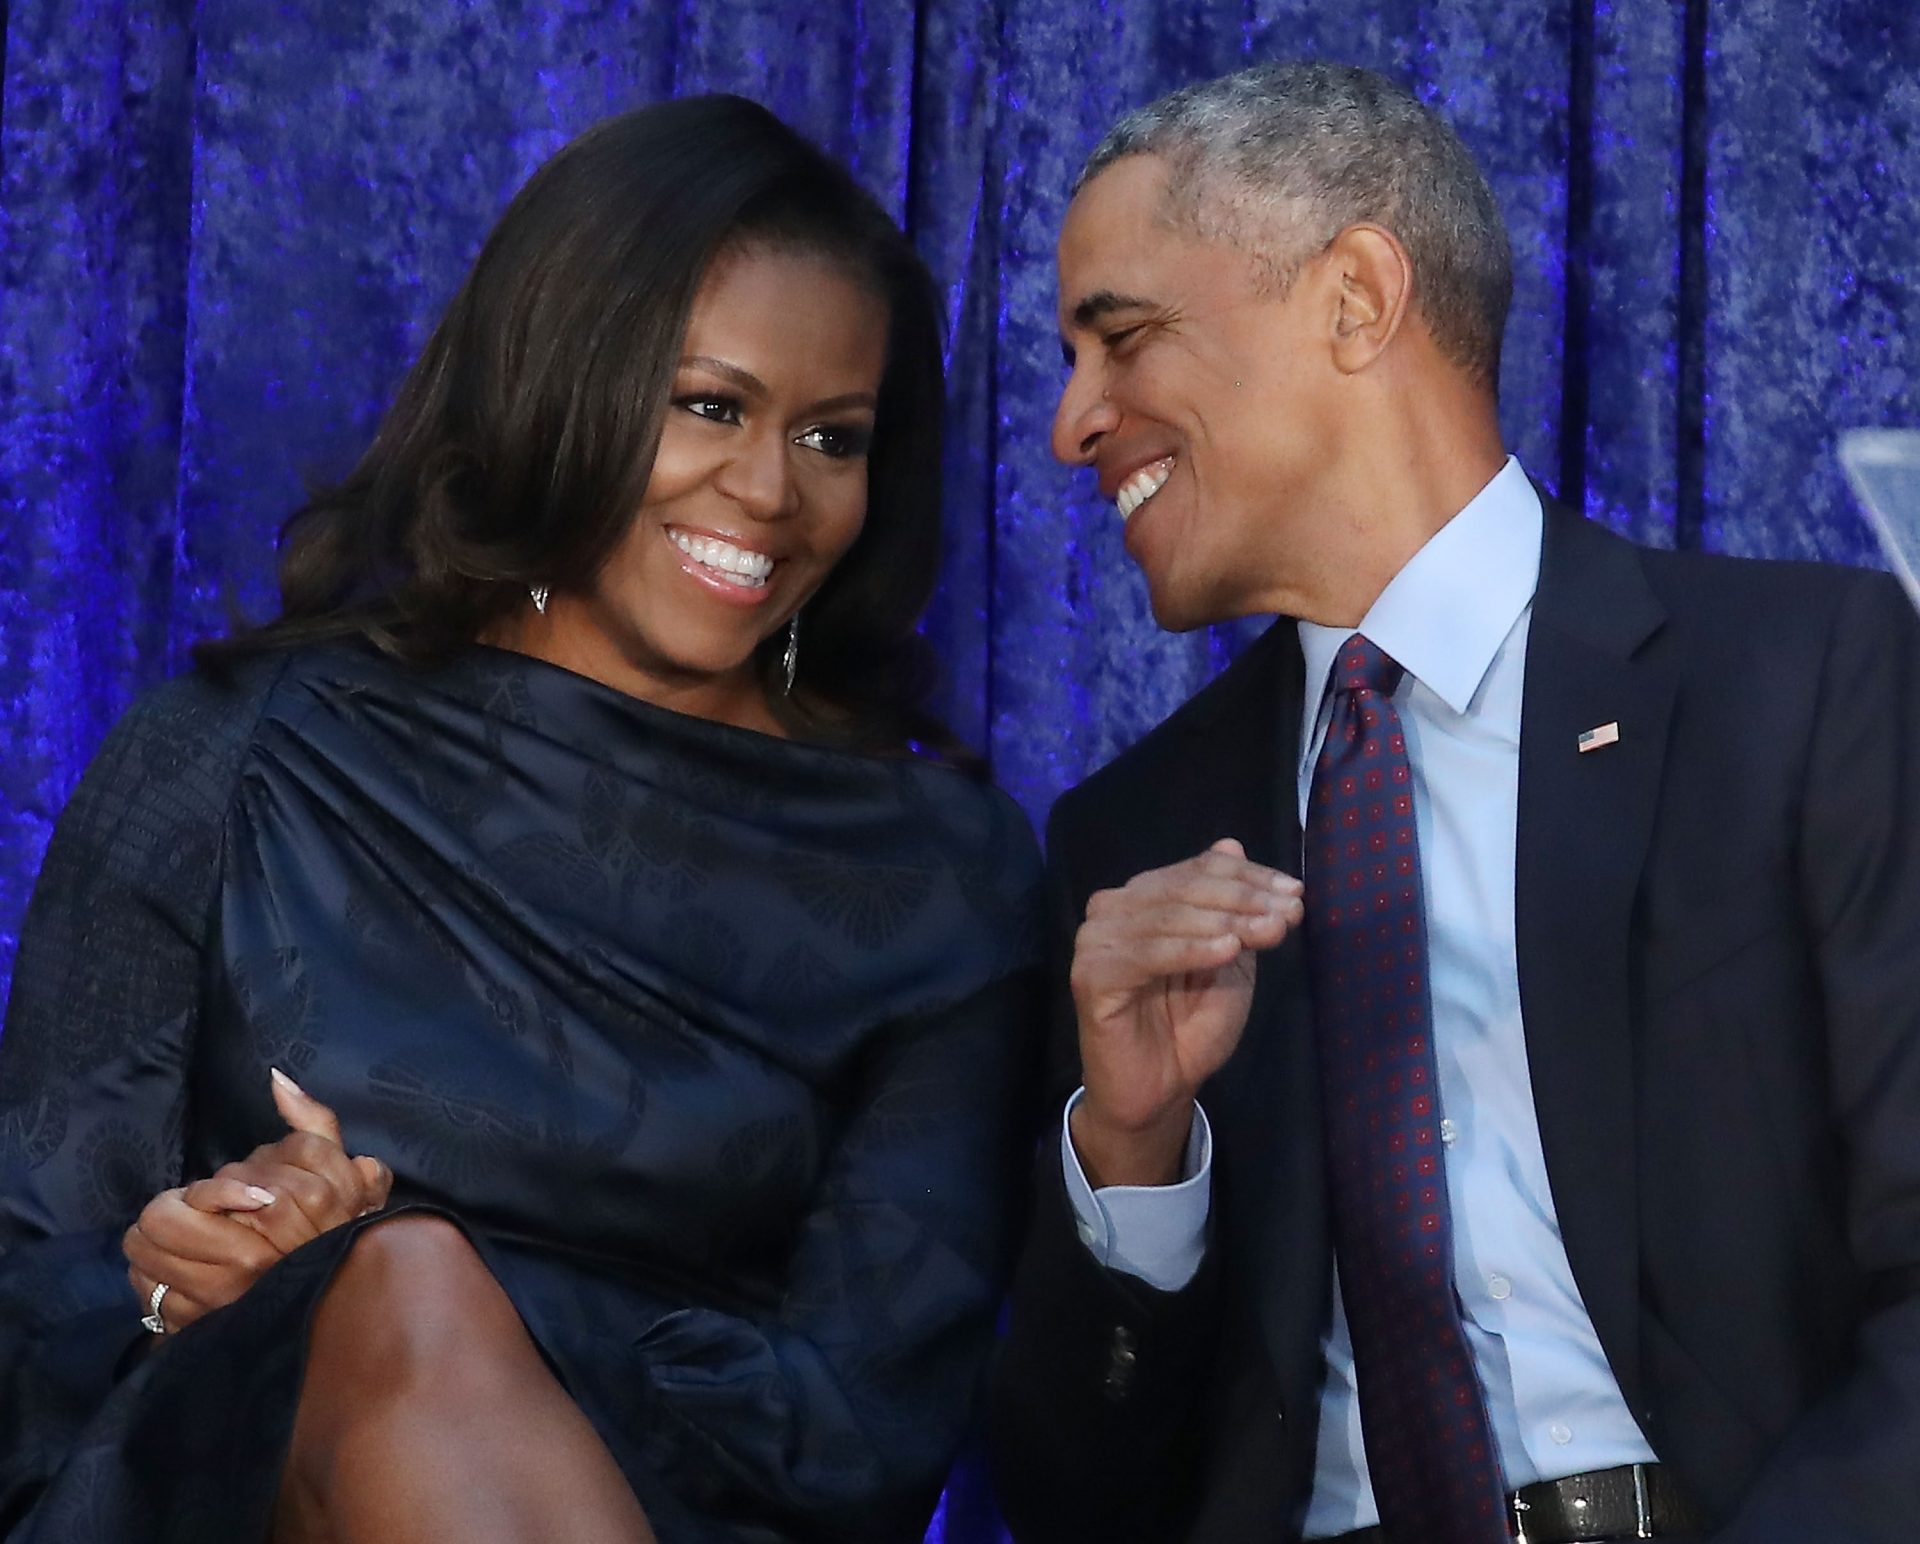 Outlandish: Barack Obama Shares Memoir About Going to a College Event With Michelle